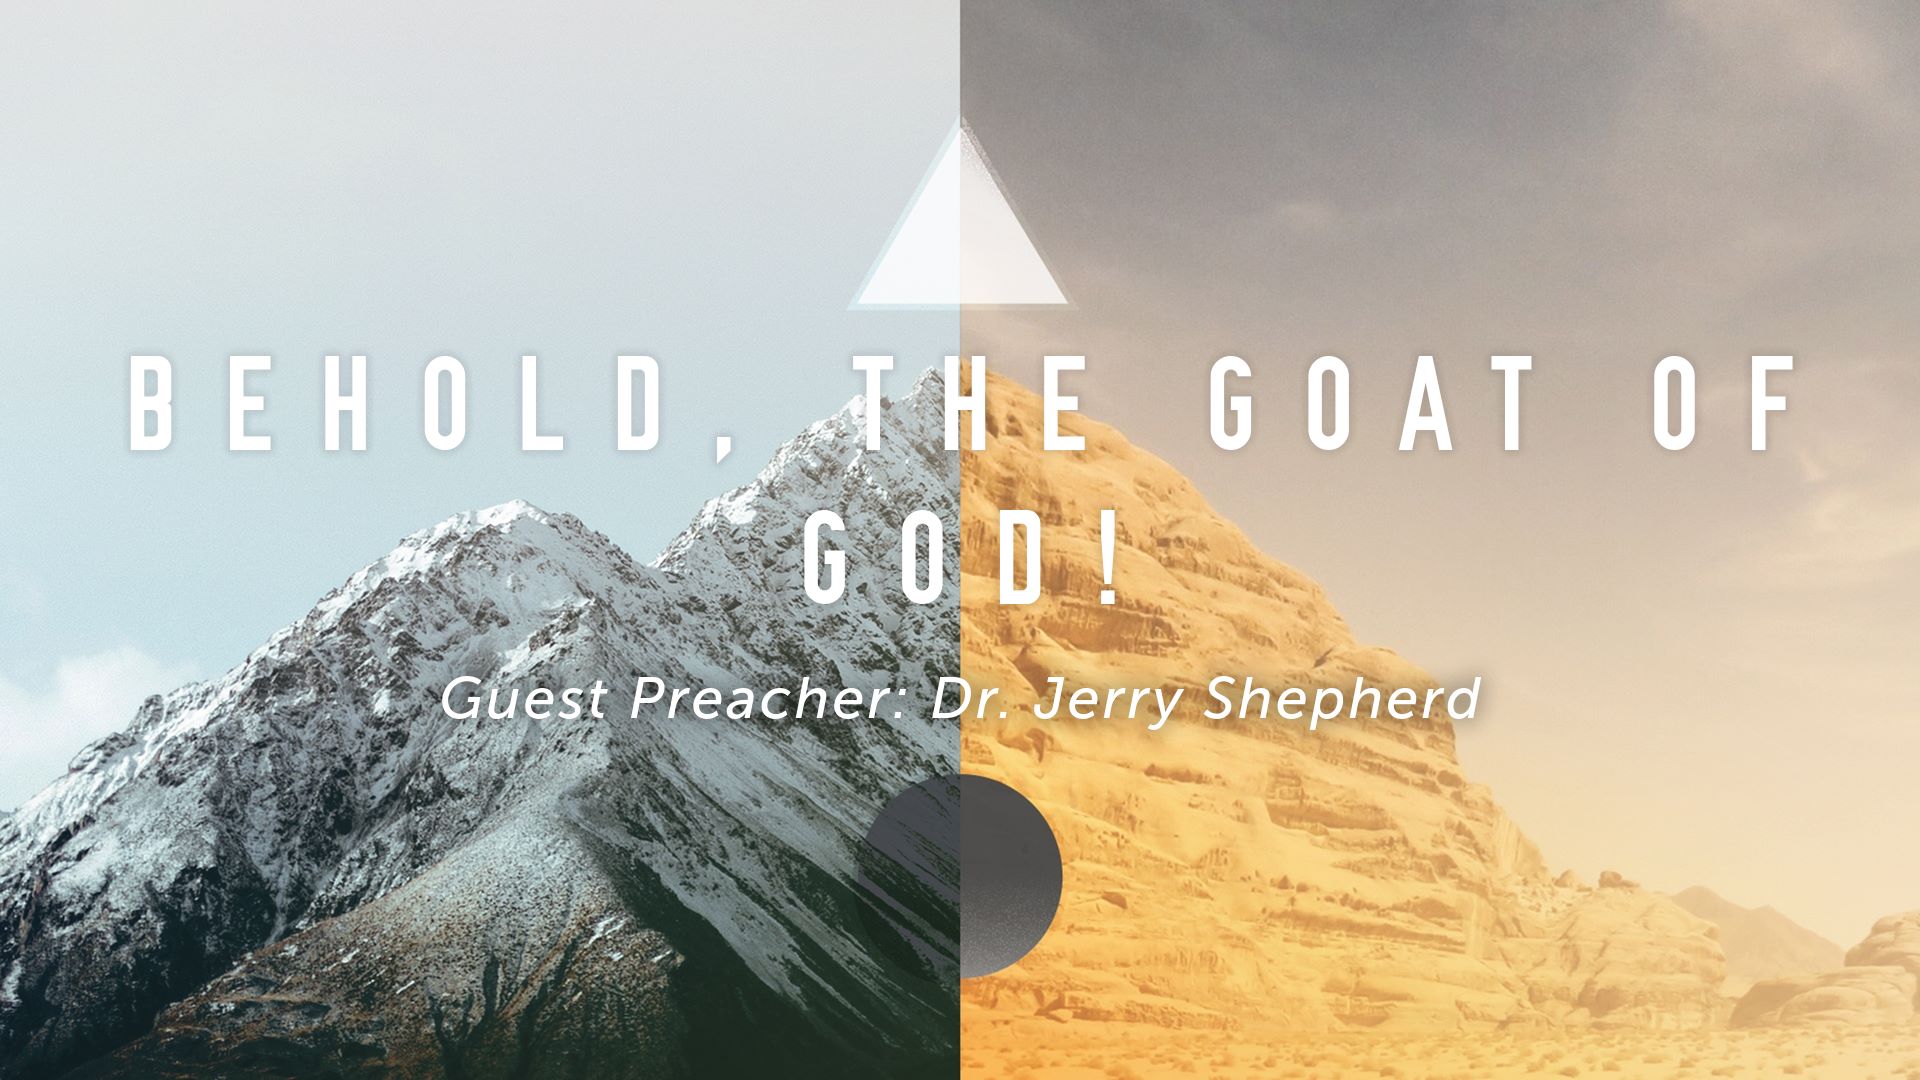 Behold, the Goat of God!